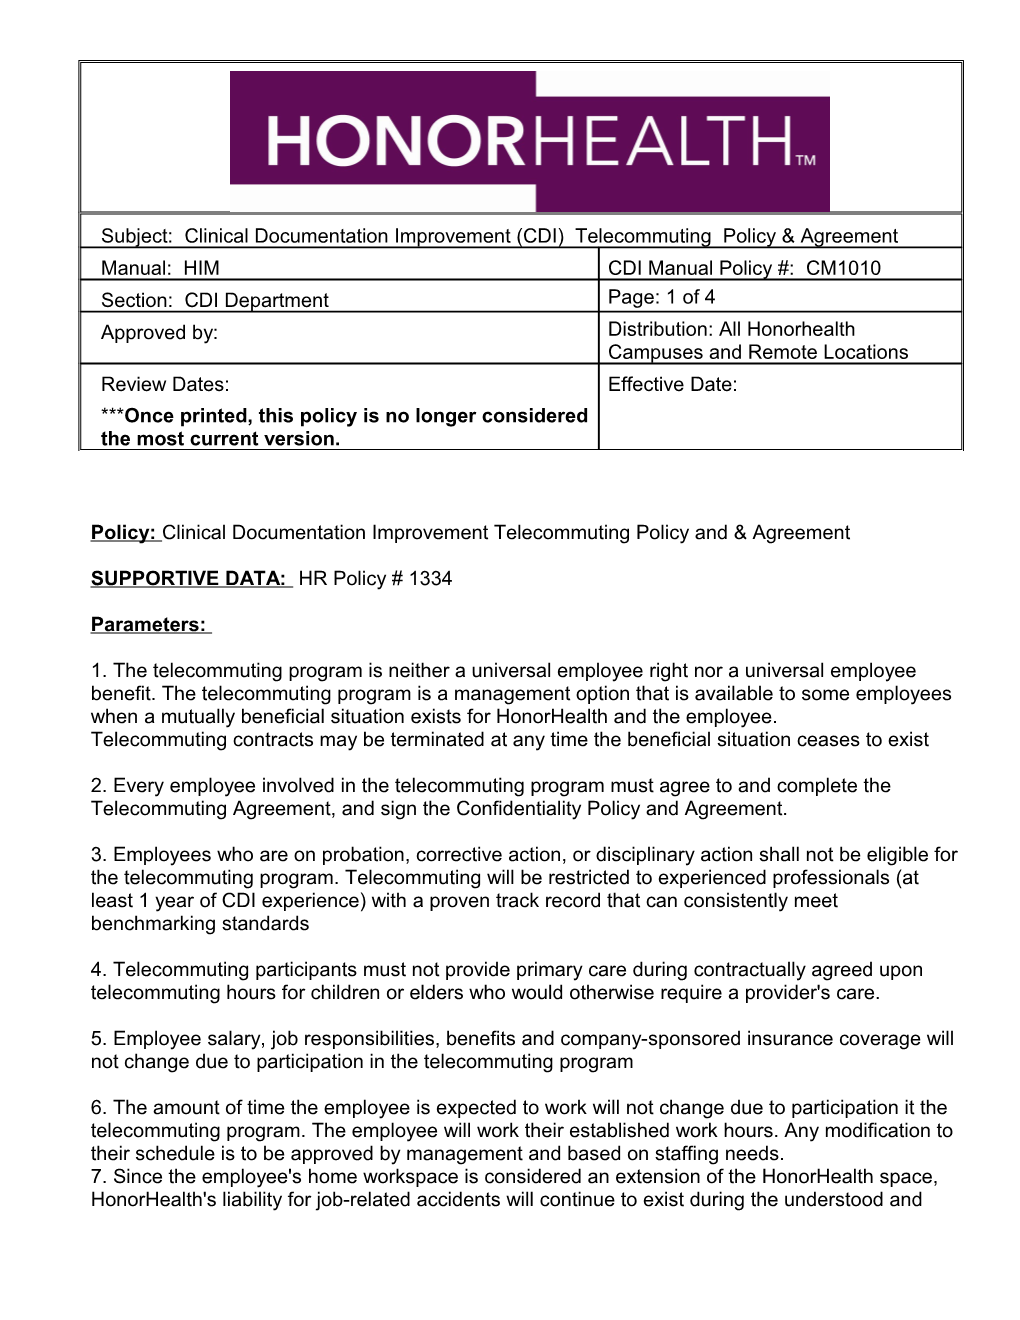 Policy:Clinical Documentation Improvement Telecommuting Policy and & Agreement